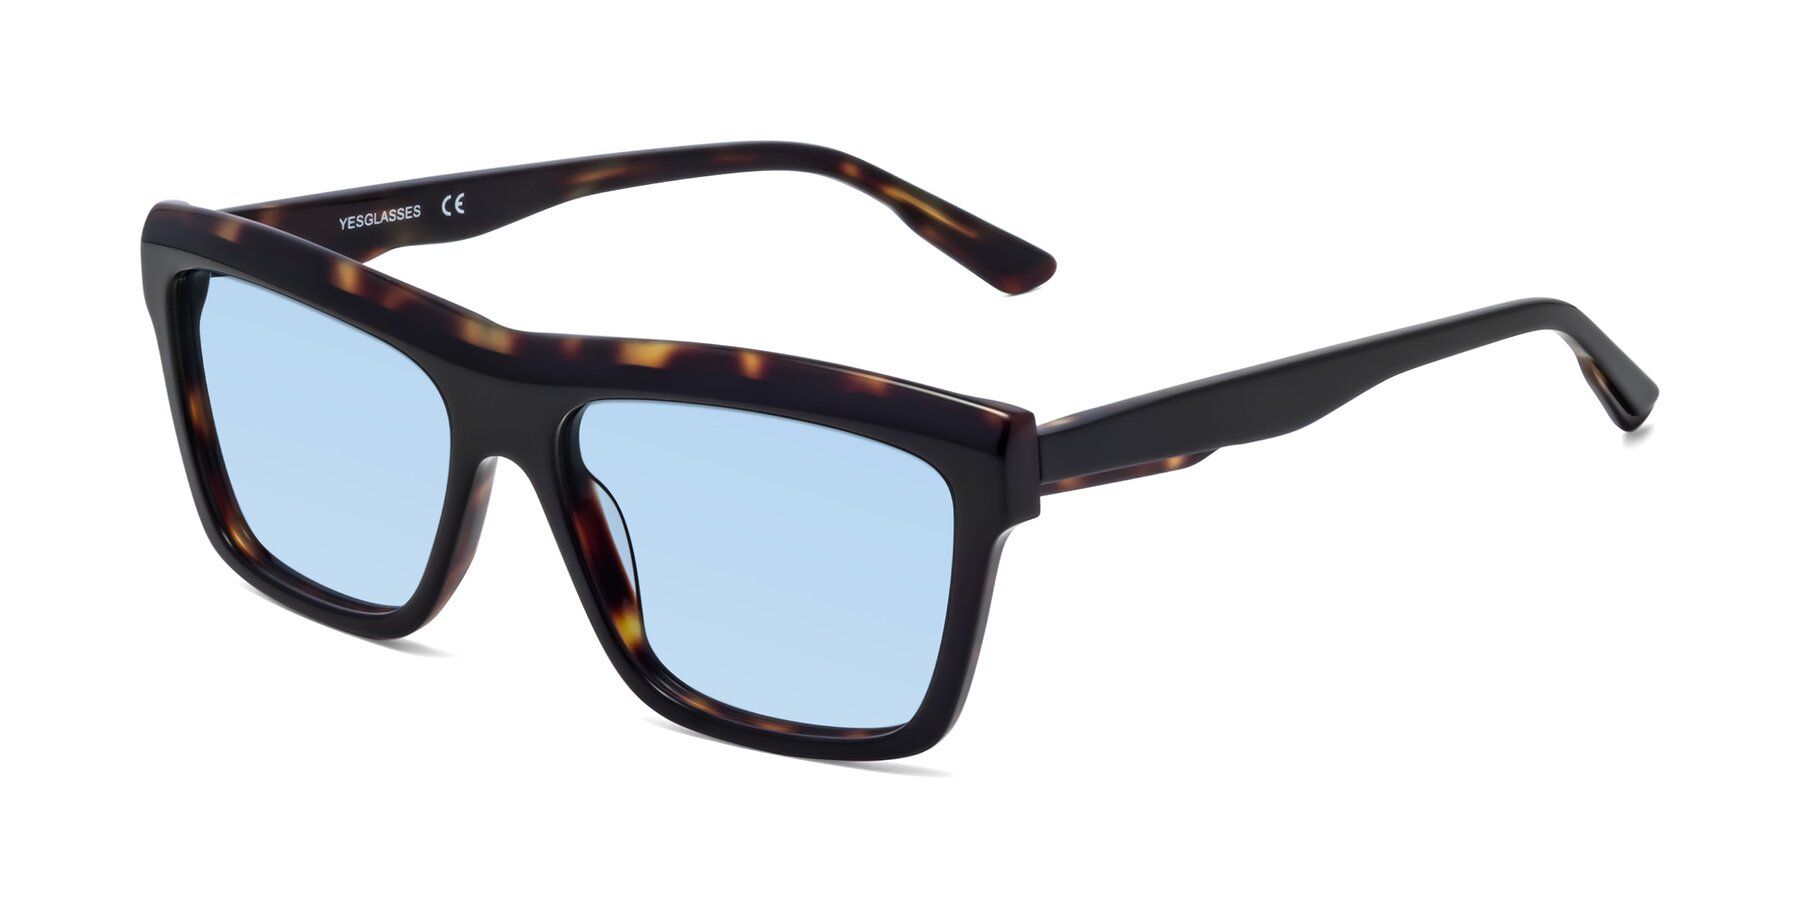 Angle of 1481 in Tortoise with Light Blue Tinted Lenses